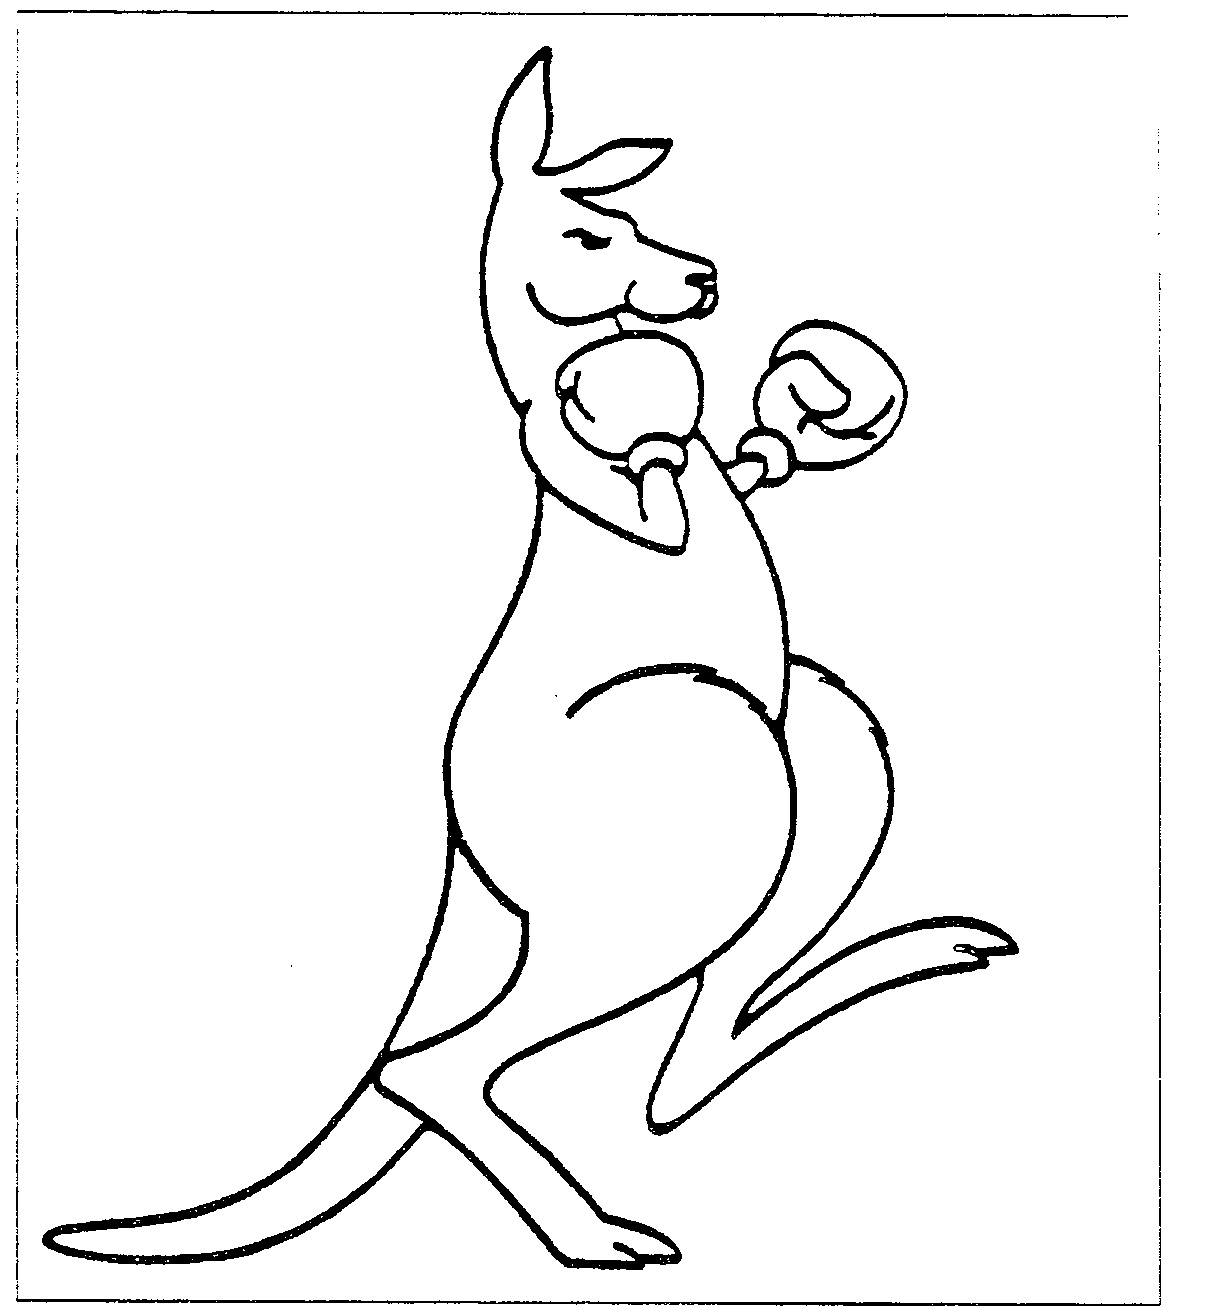 27 Kangaroo Drawing Free Cliparts That You Can Download To You